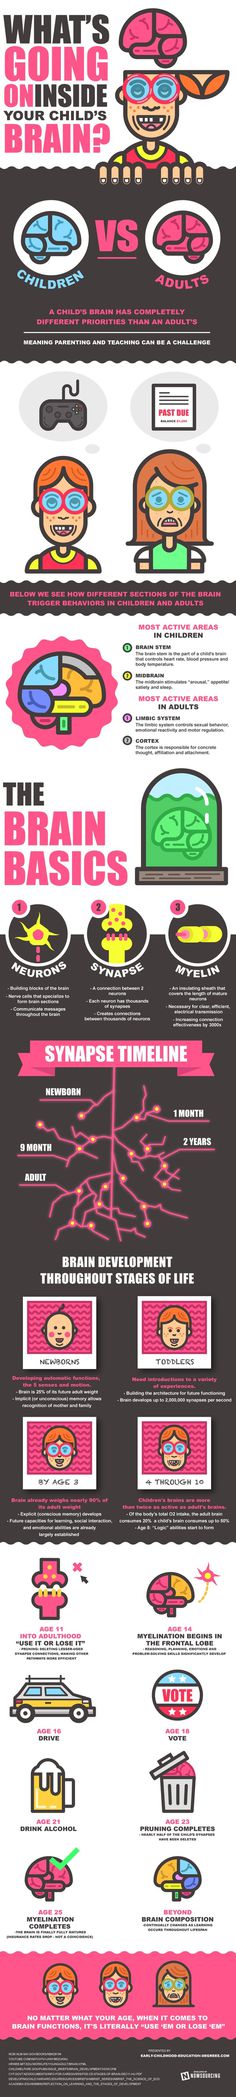 This infographic details the mysteries of human brain development. #development #infographic #childhood #brain